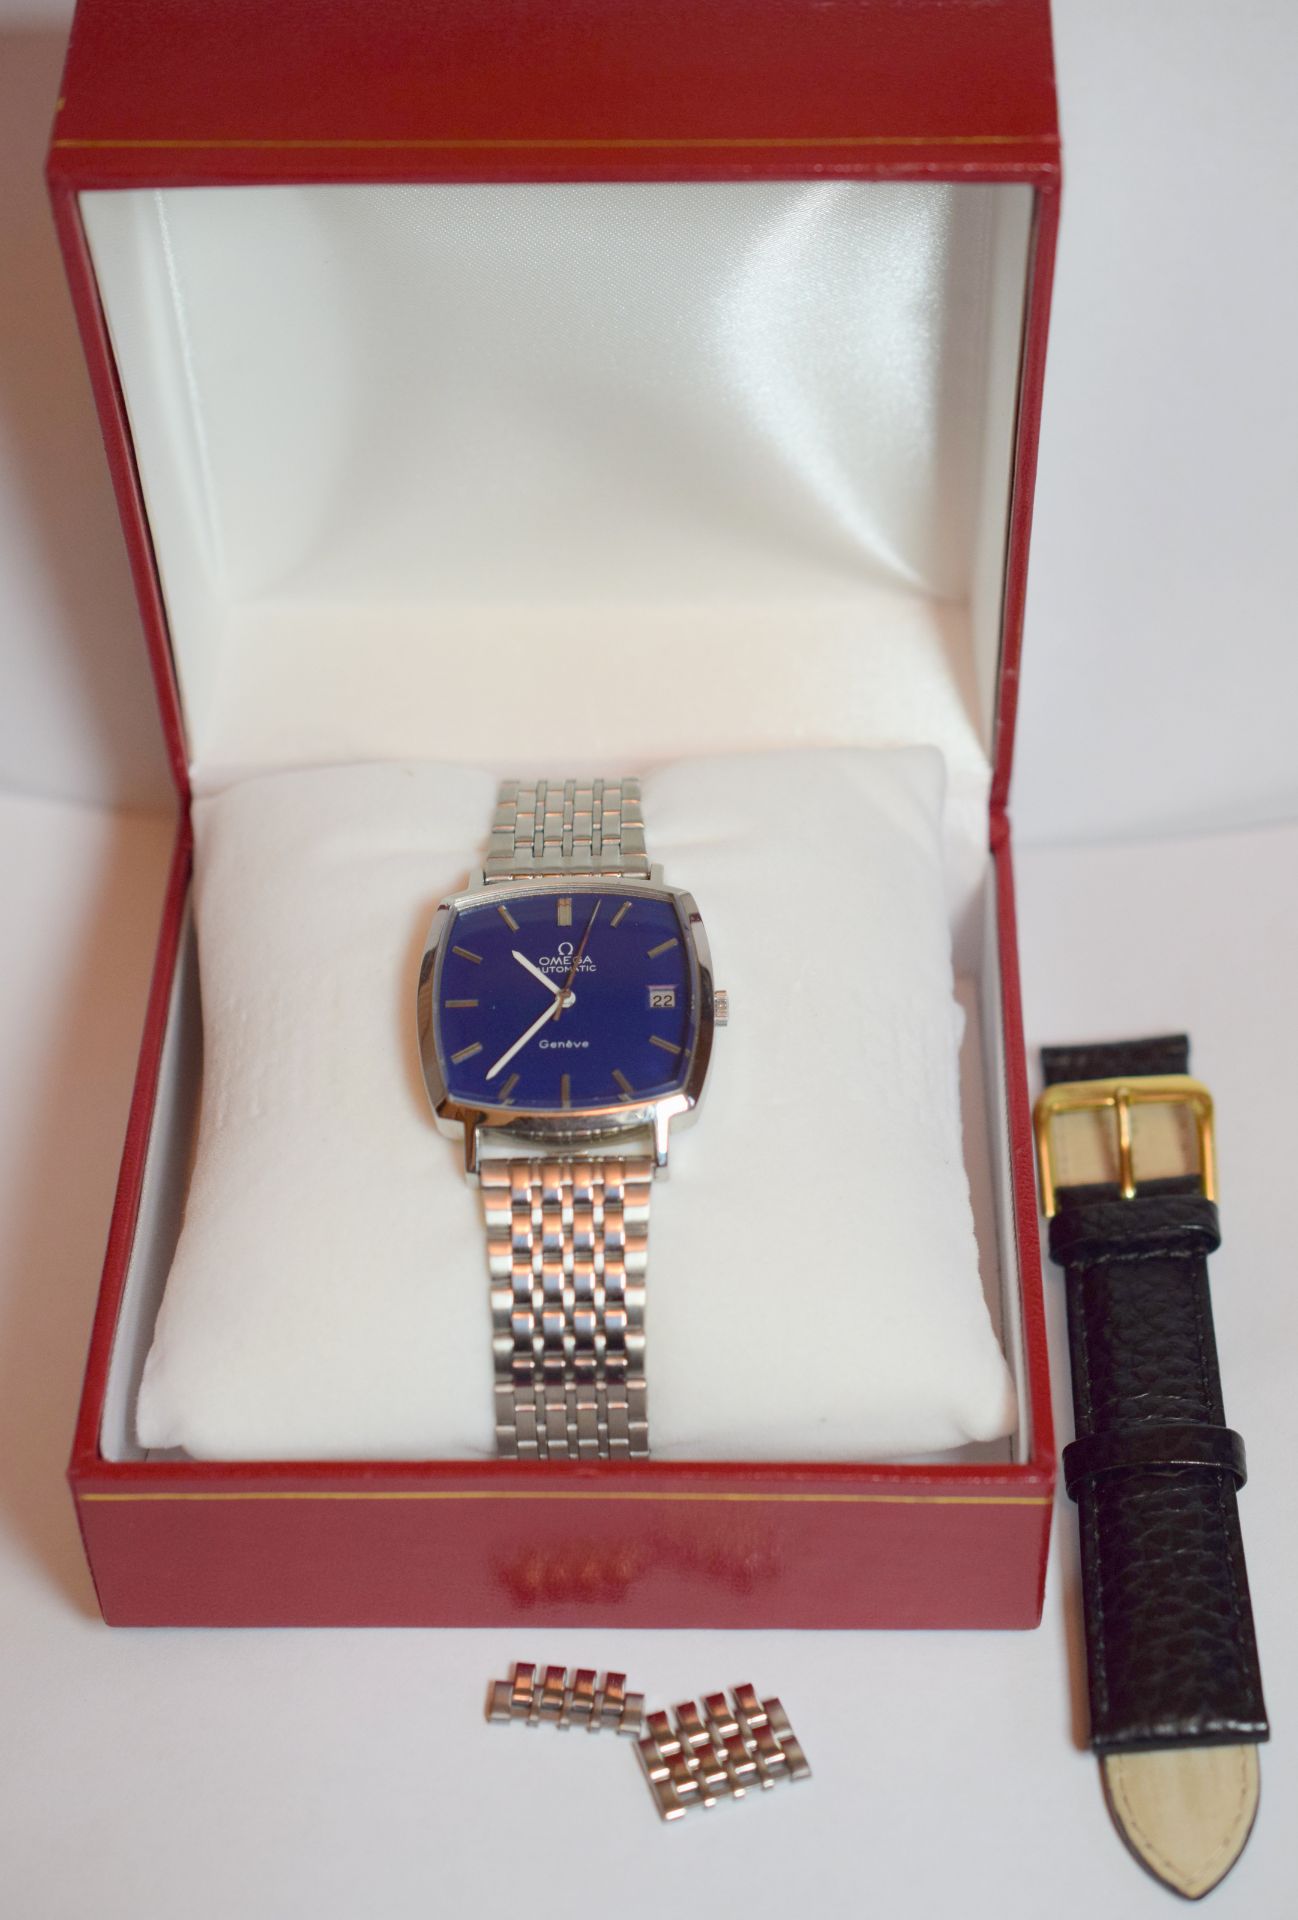 Omega Geneve ST162.0052 c.1973 With Stunning Blue Dial - Image 4 of 11